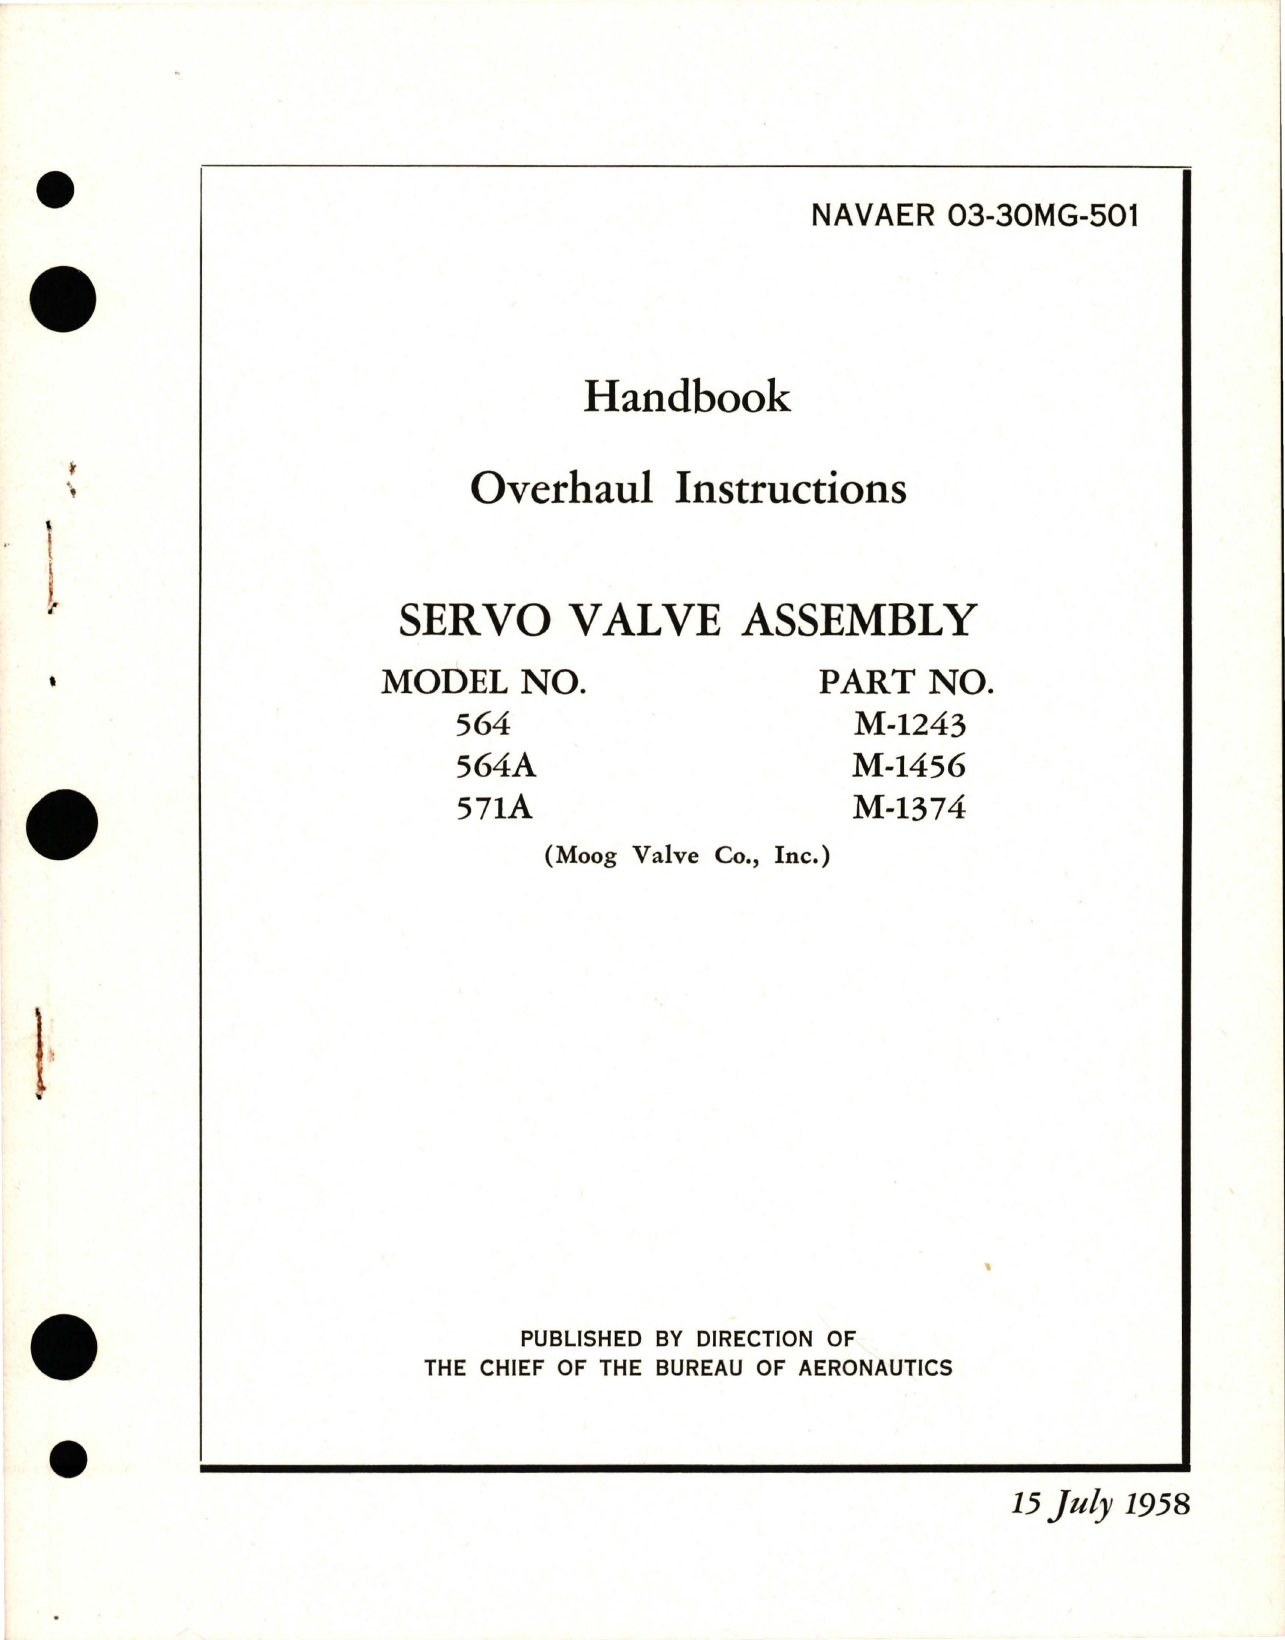 Sample page 1 from AirCorps Library document: Overhaul Instructions for Servo Valve Assembly - Model 564, 564A, and 571A